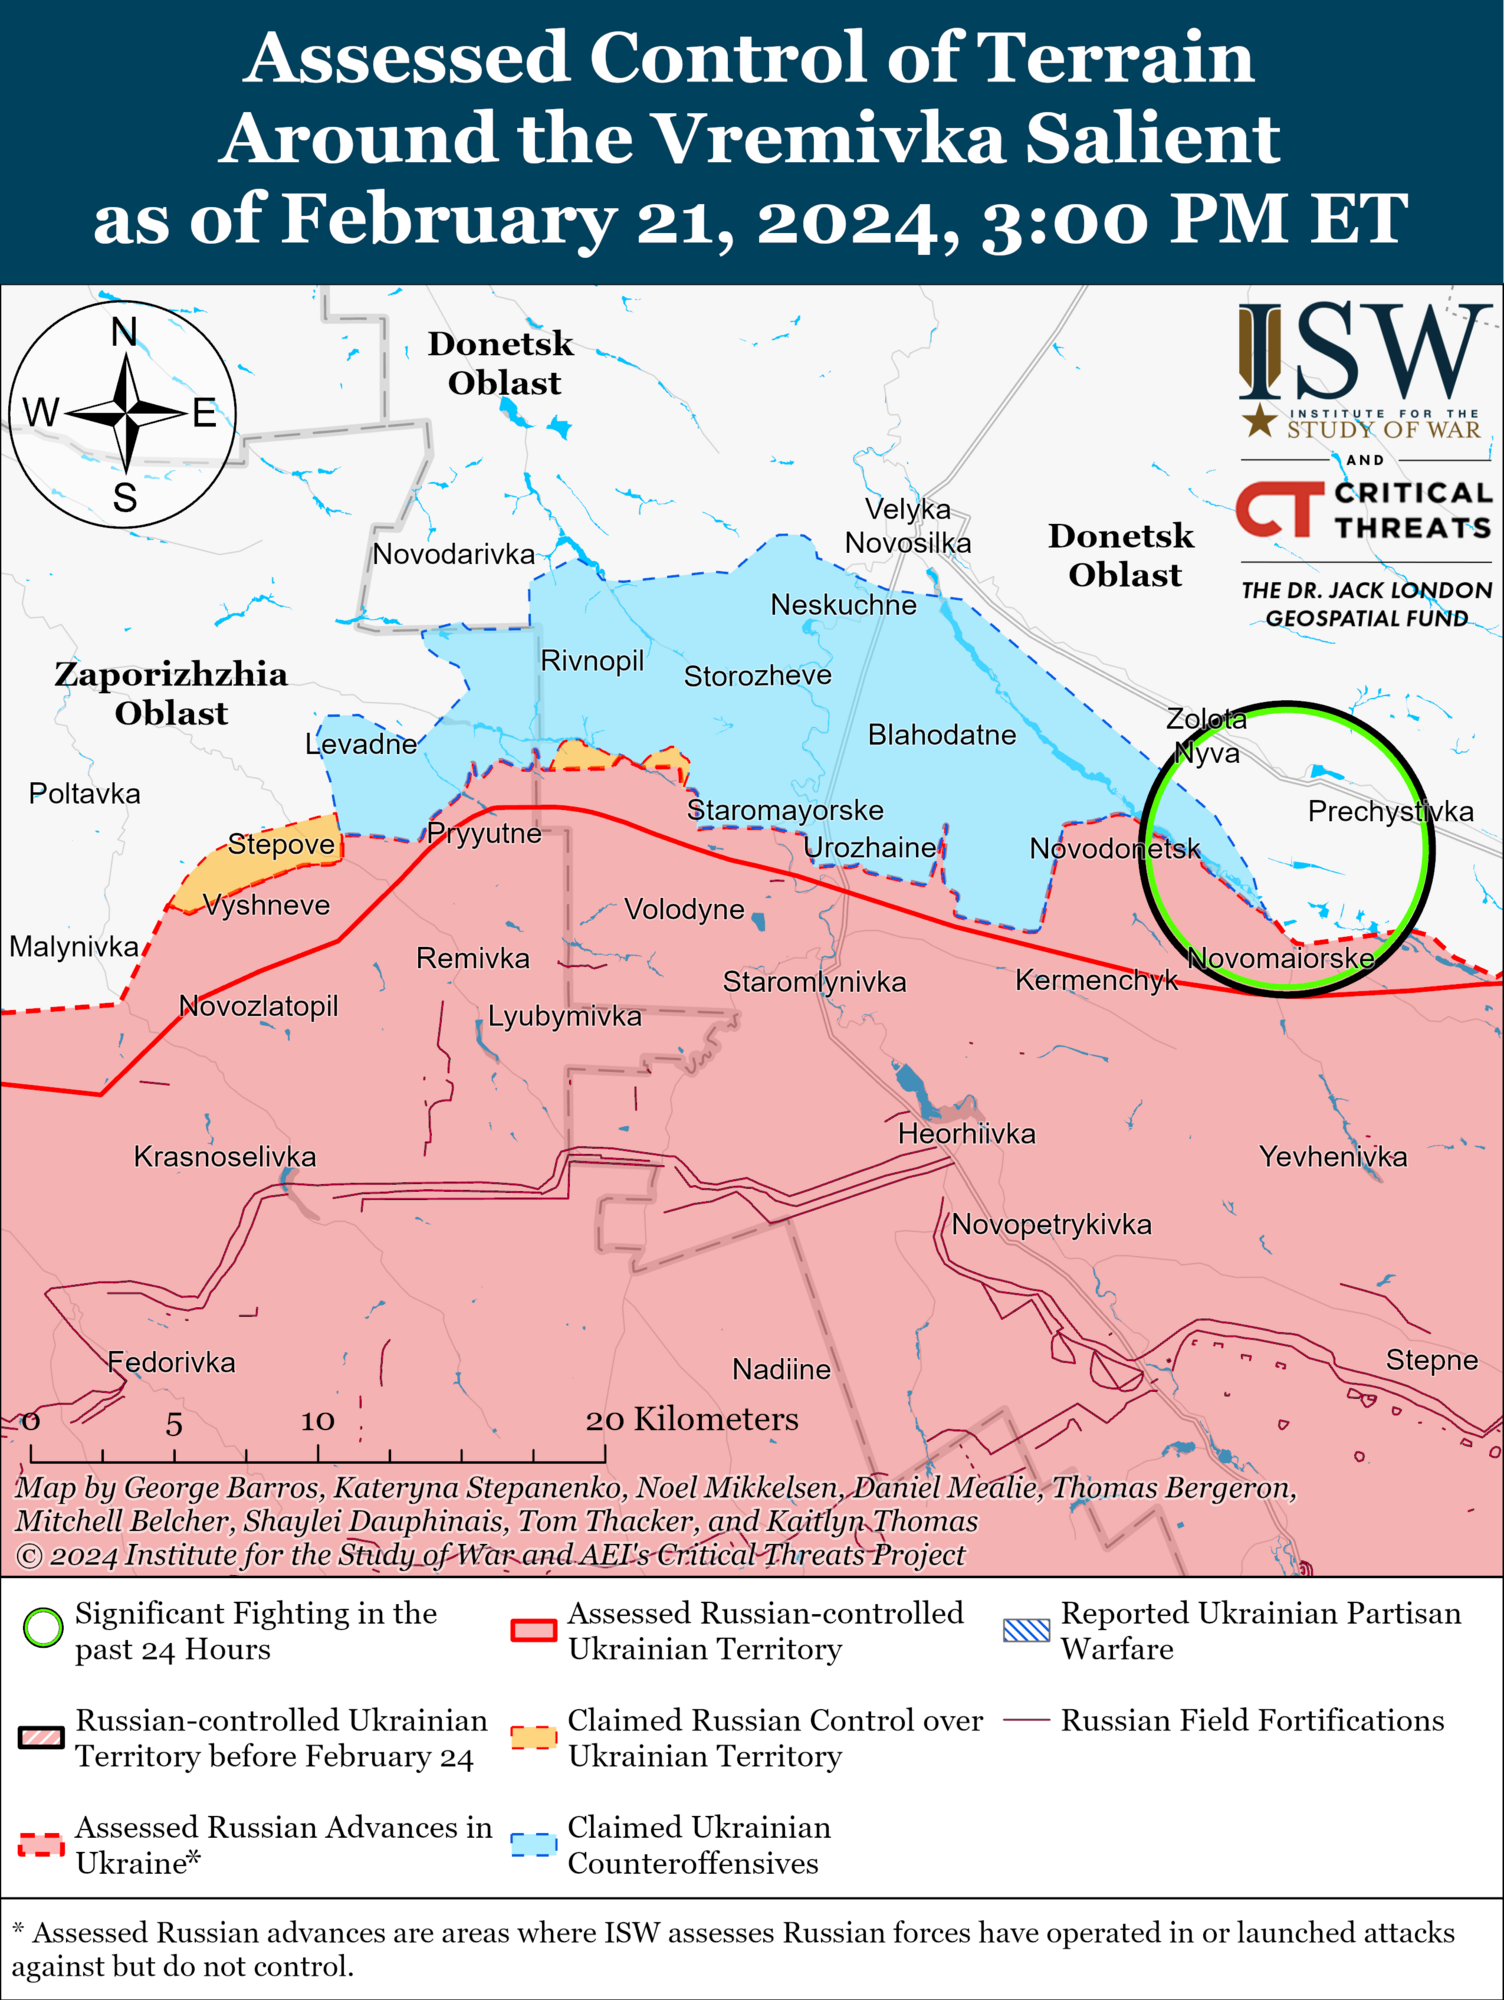 Occupants made minor advances in Zaporizhzhia, Ukrainian Armed Forces hold positions in Krynky: ISW analysis of hostilities. Map